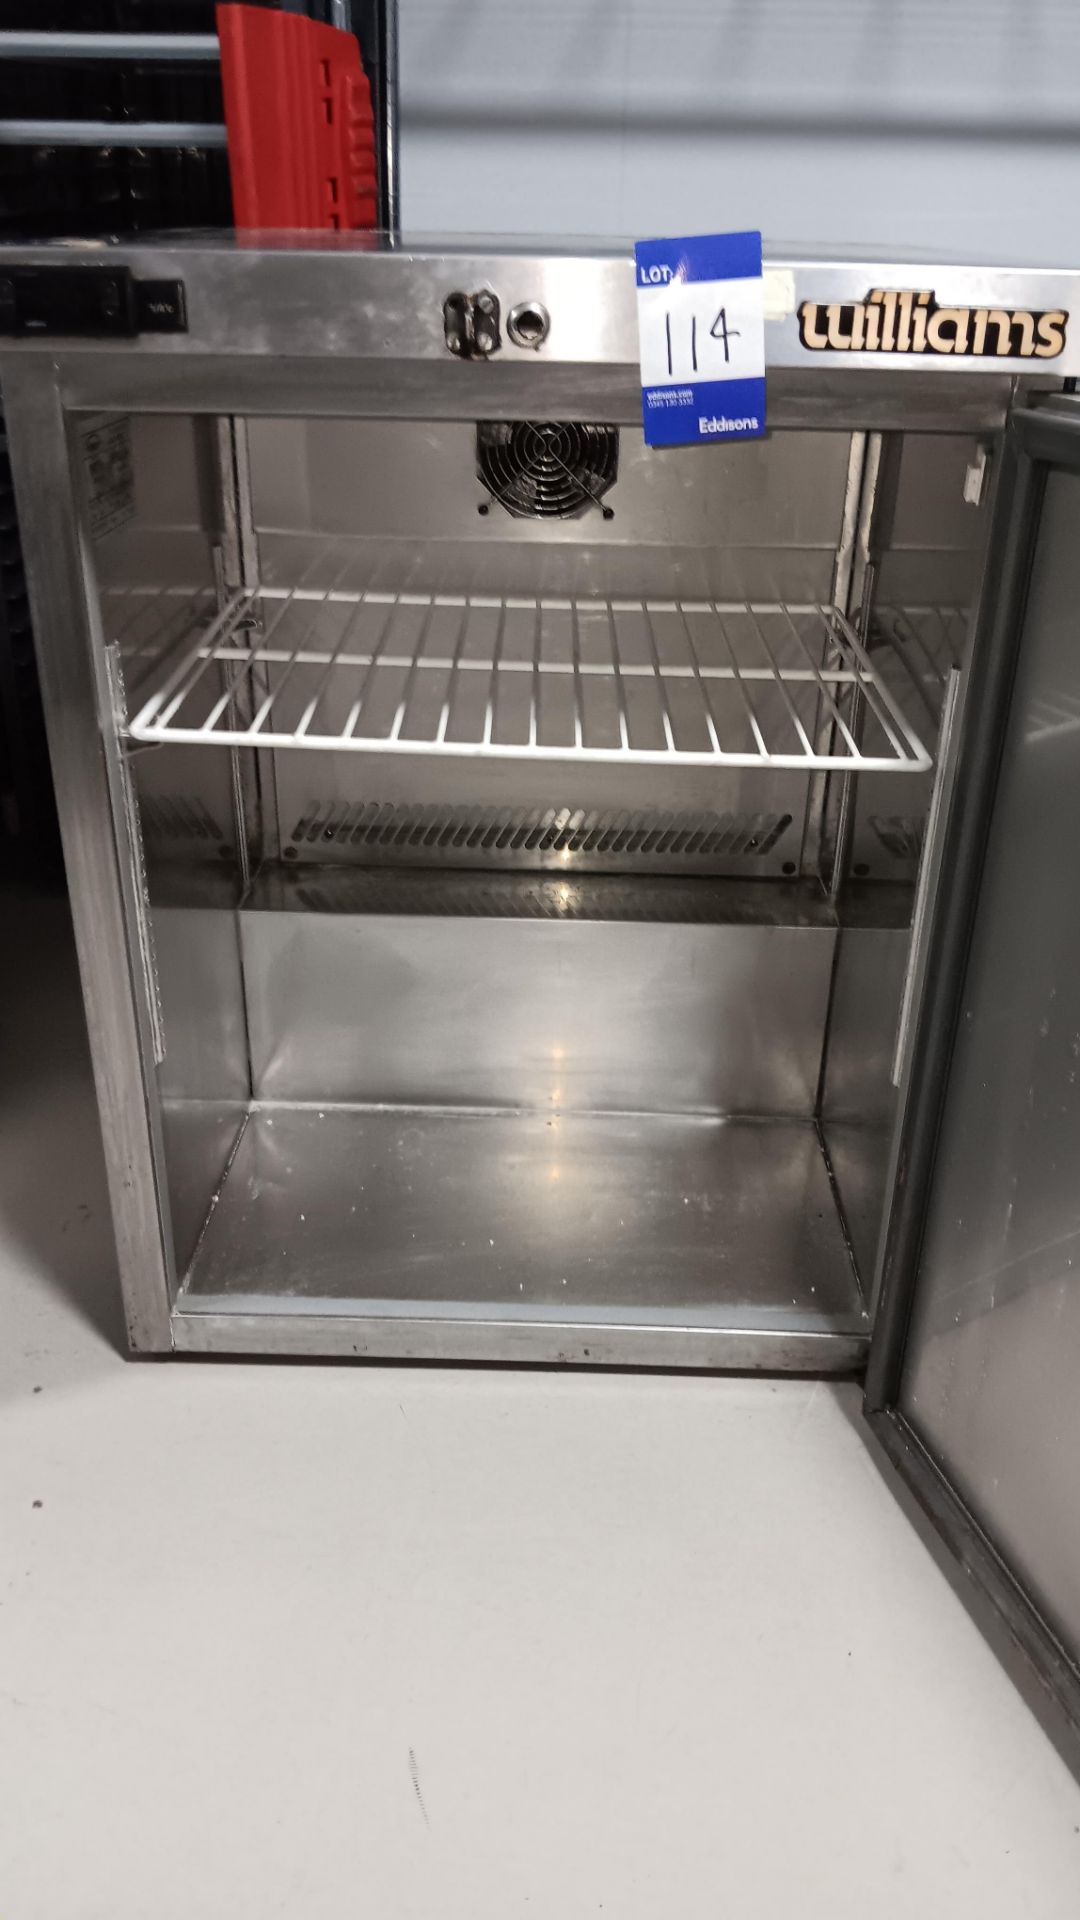 Williams HP5SC-SS Stainless steel undercounter single door refrigerator, Serial number 0312/*370940 - Image 2 of 4